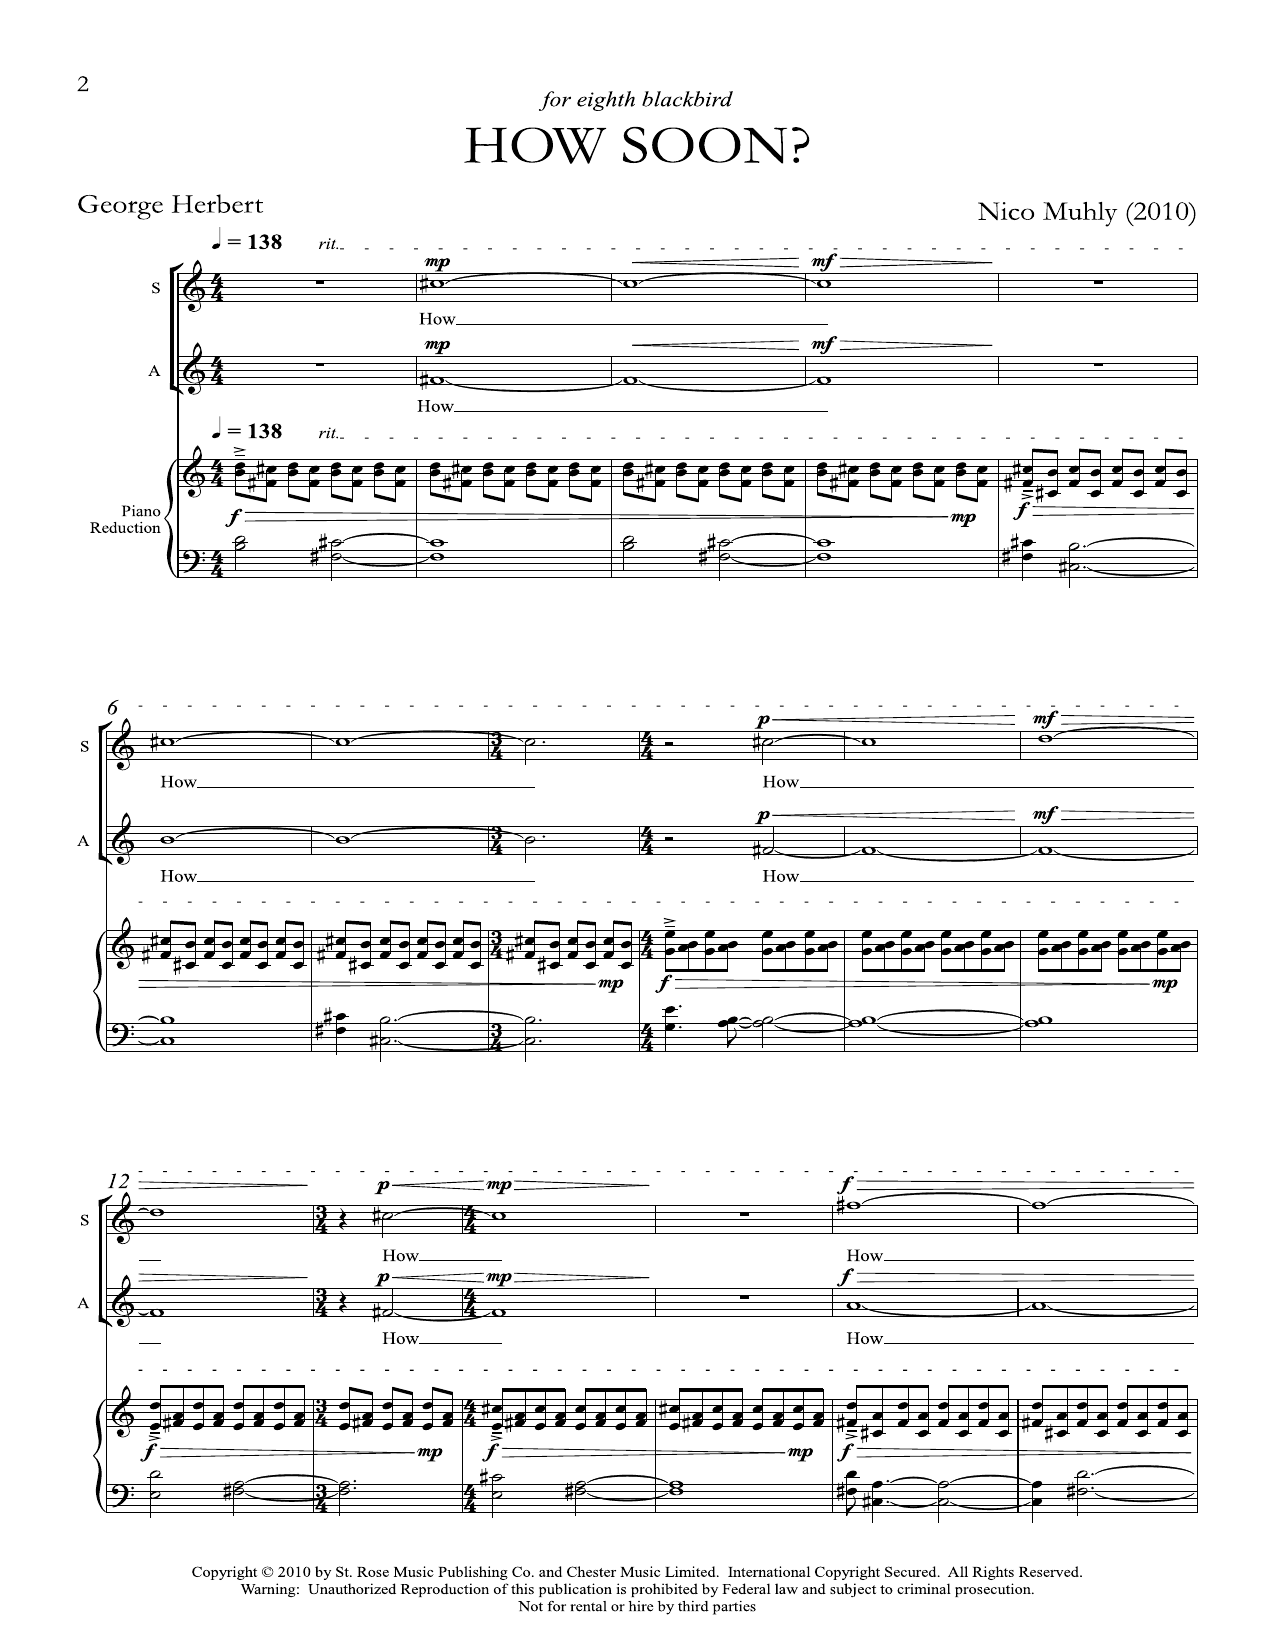 Download Nico Muhly How Soon? Sheet Music